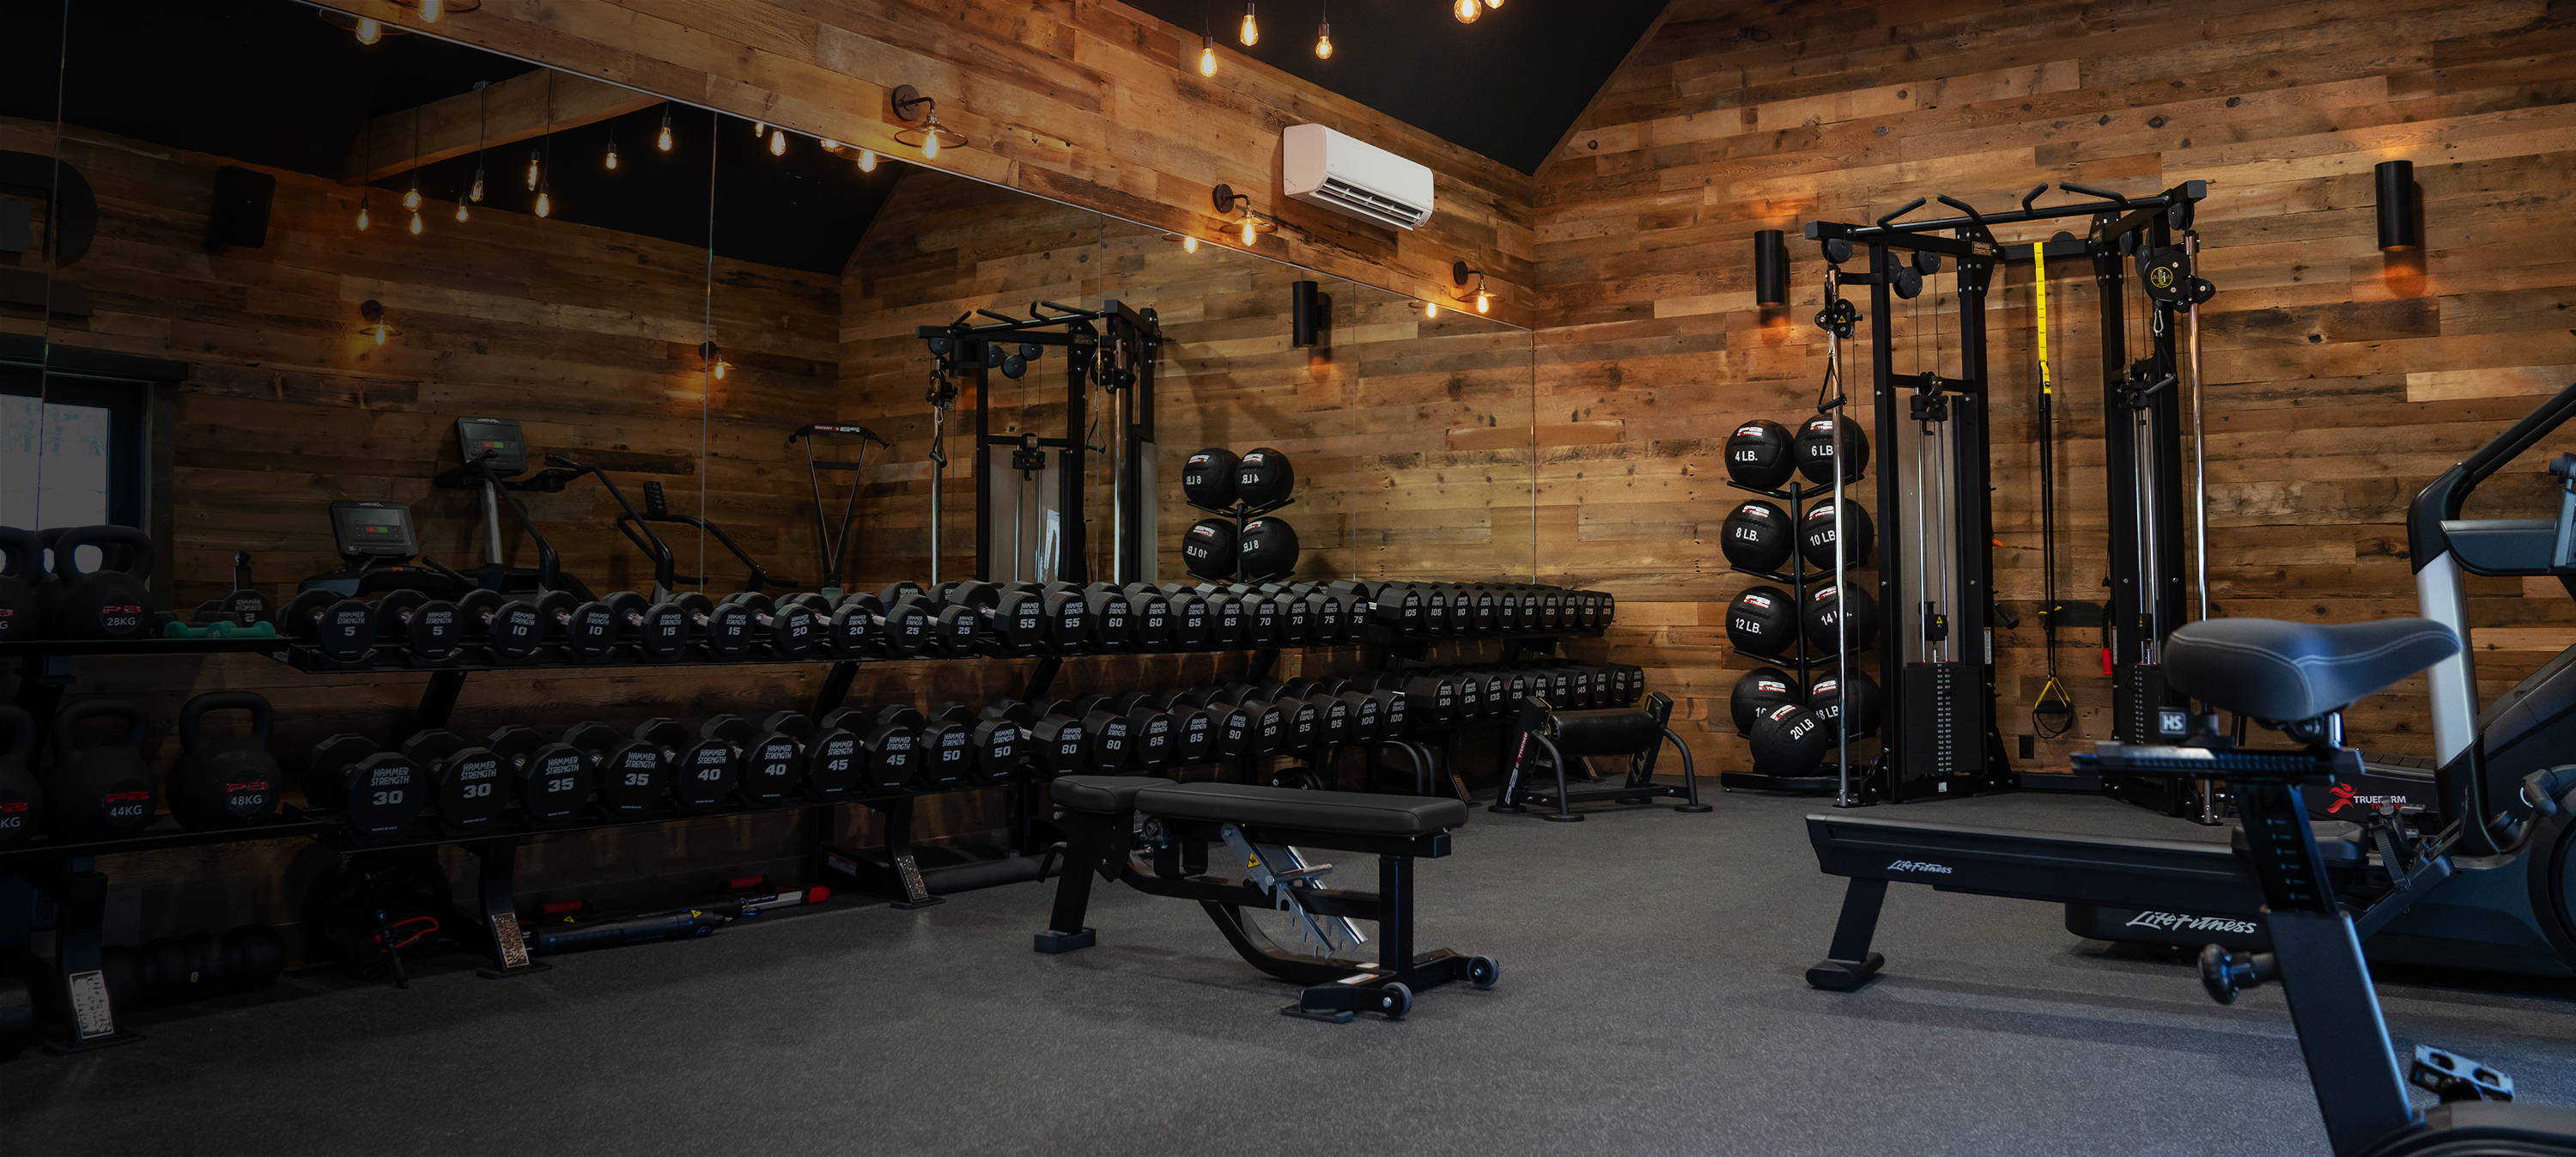 Equipment Must-Haves For Your Home Gym